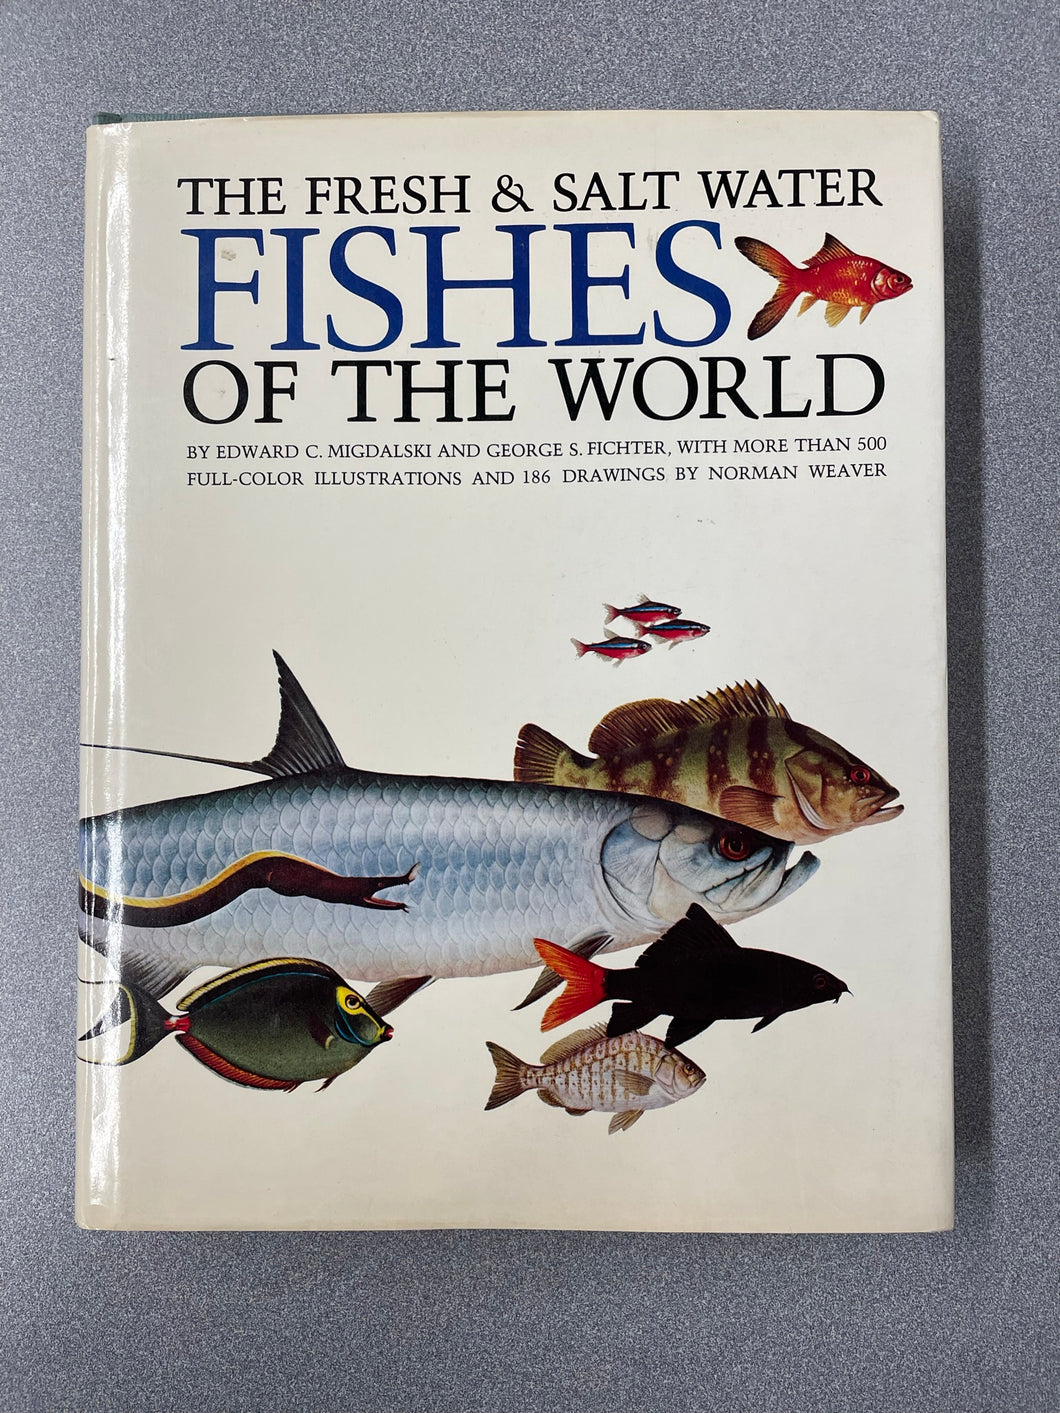 The Fresh and Salt Water Fishes of the World: With More Than 500 Full-Color Illustrations and 186 Drawings, Migdalski, Edward C. and George S. Fichter, [1976] SN 7/23